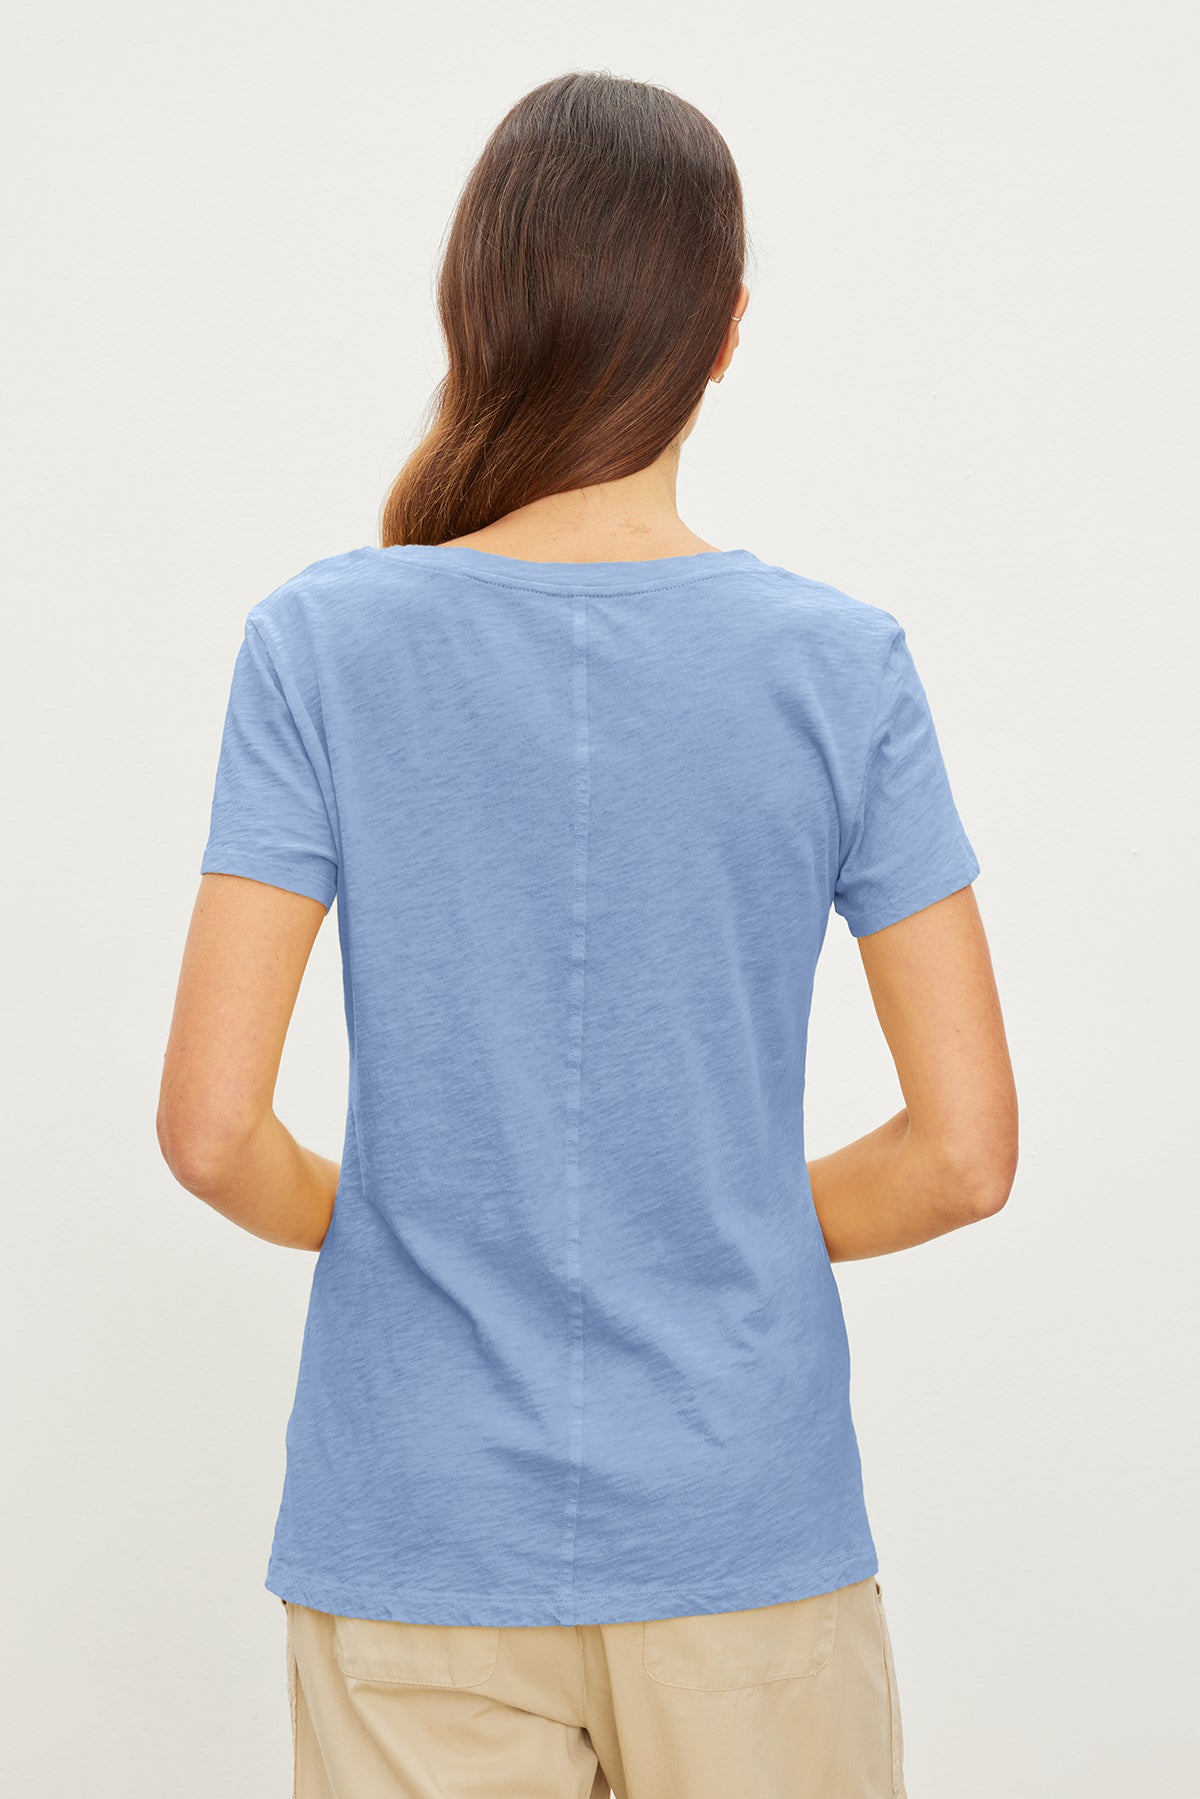   The back view of a woman in a Velvet by Graham & Spencer LILITH COTTON SLUB V-NECK TEE, showcasing her tomboy style. 